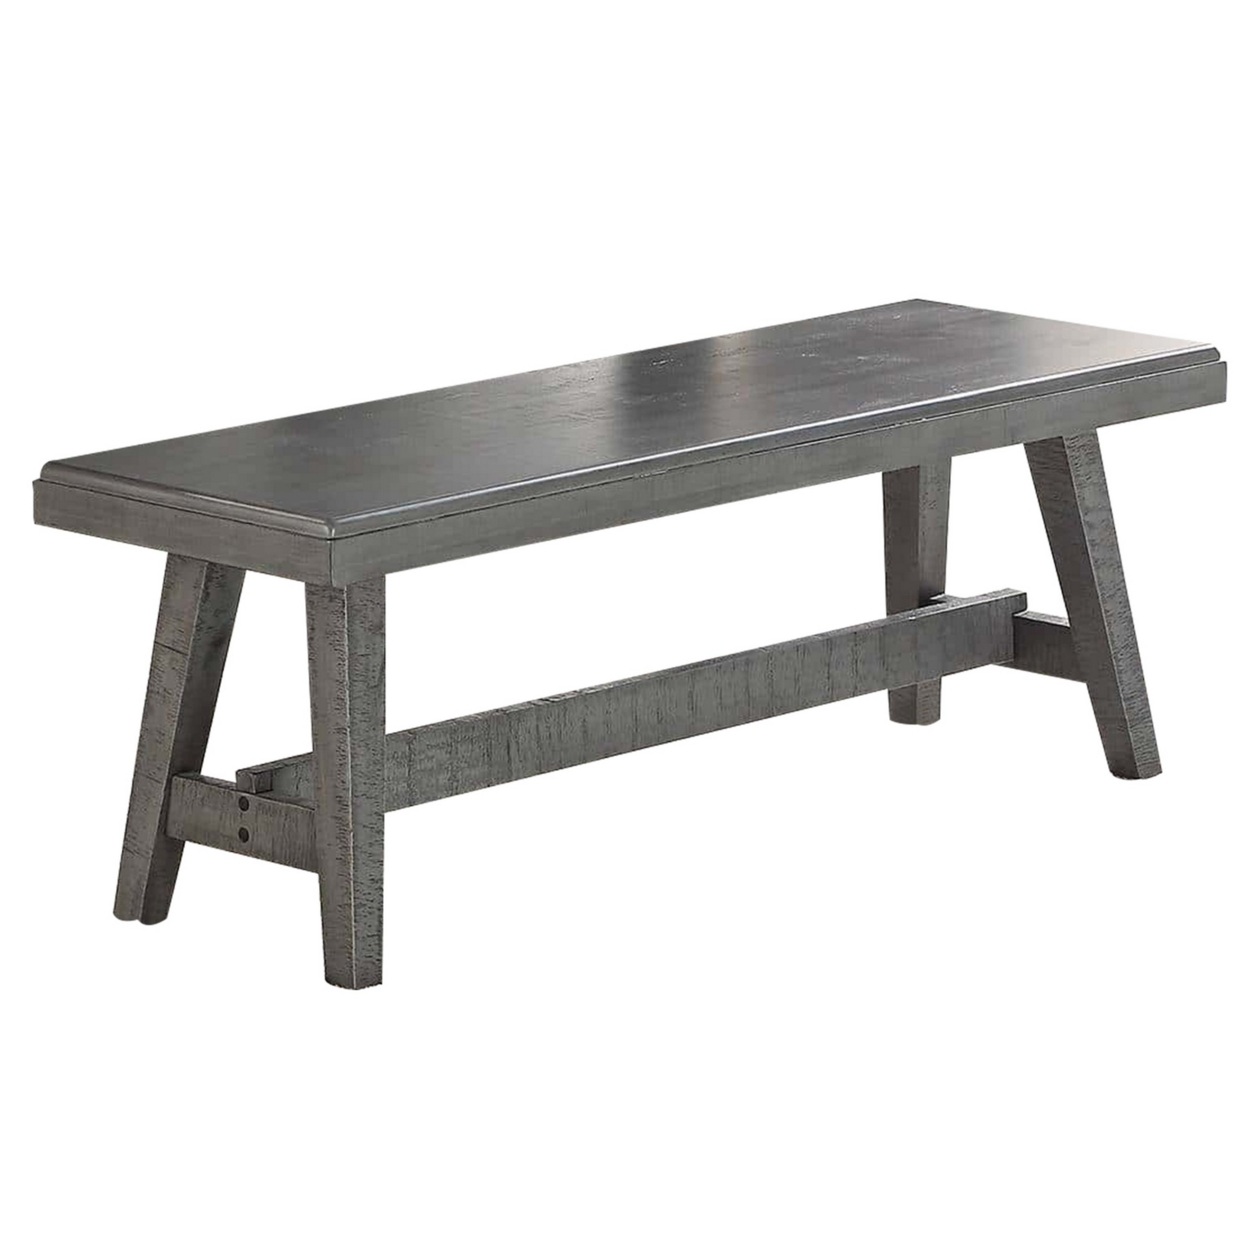 Alix 54 Inch Elegant Wood Dining Bench With Tapered Legs, Distressed Gray